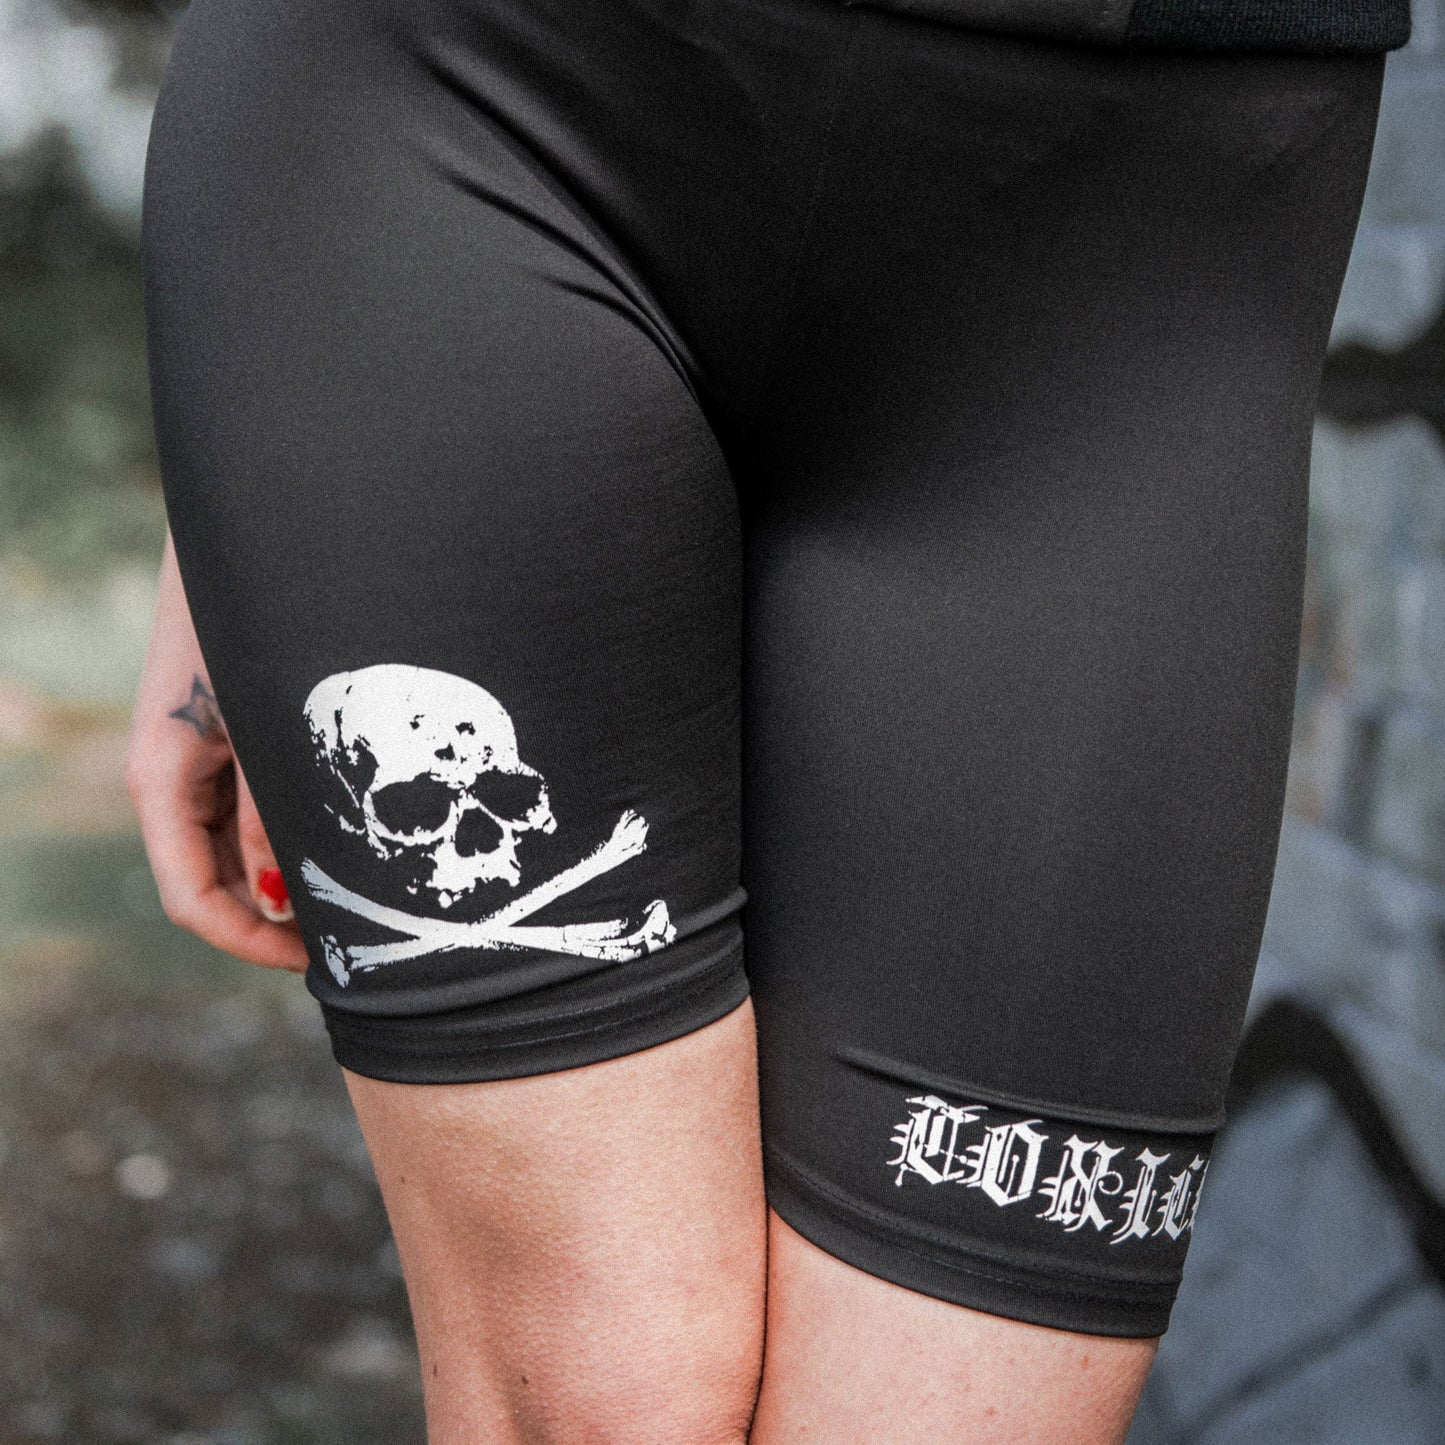 Death From Below Cycling Shorts